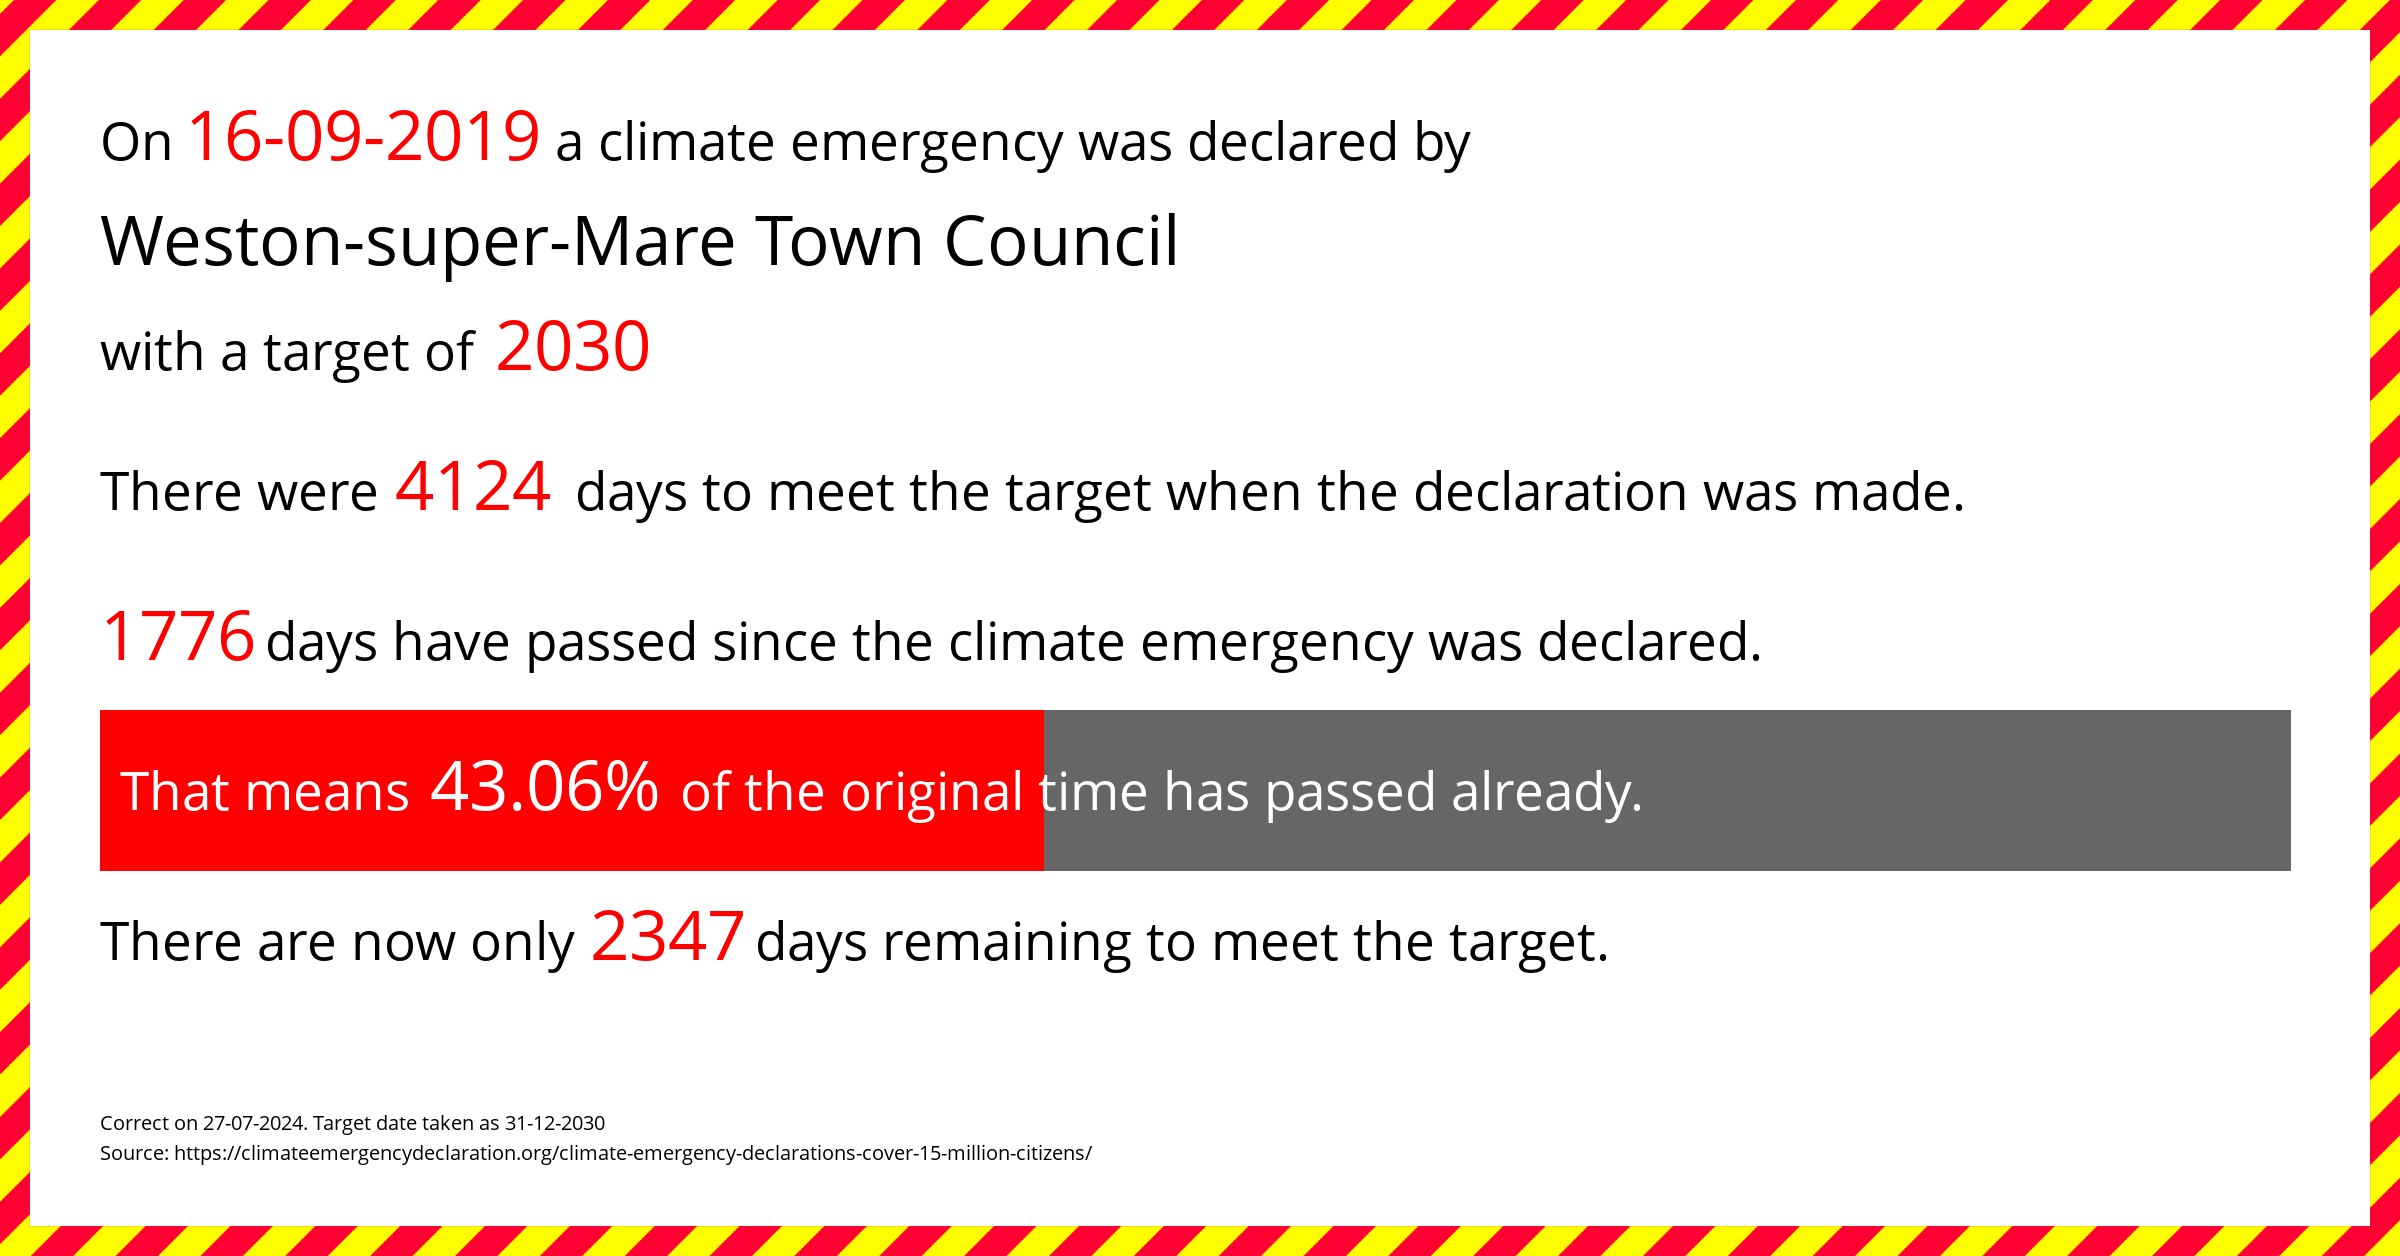 Weston-super-Mare Town Council declared a Climate emergency on Monday 16th September 2019, with a target of 2030.